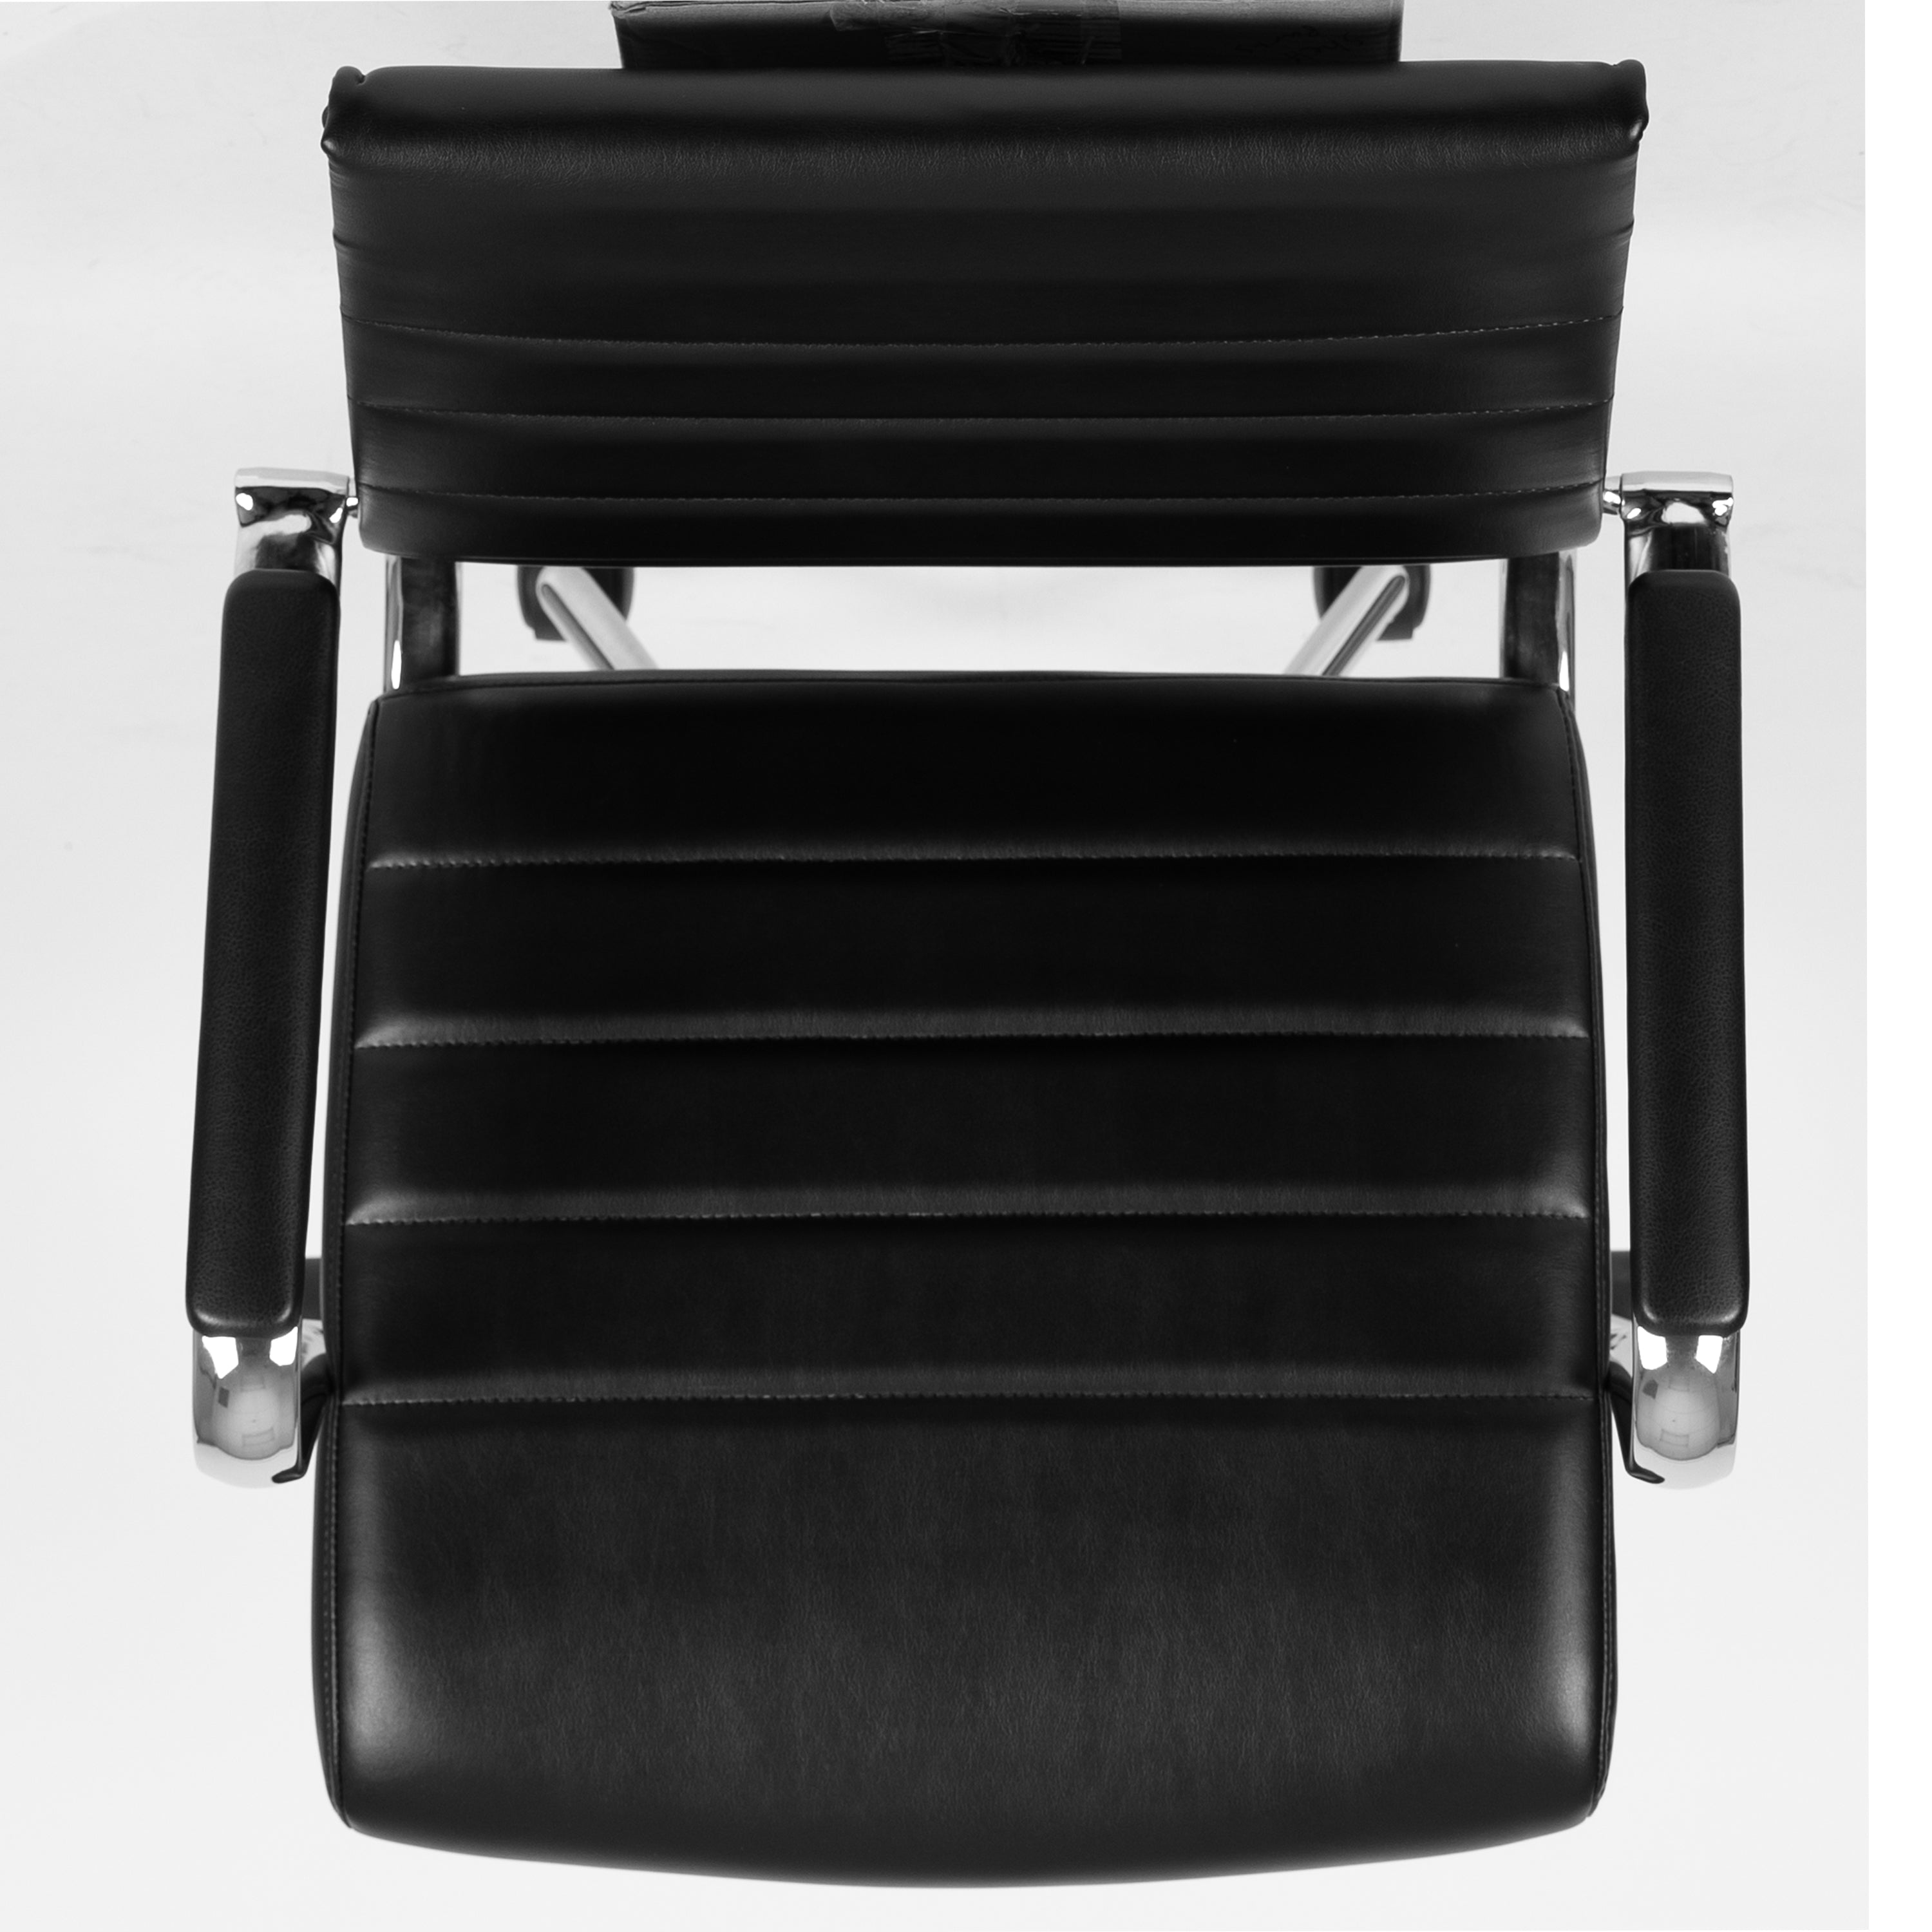 Mid-Back LeatherSoft Contemporary Ribbed Executive Swivel Office Chair-Executive Office Chair-Flash Furniture-Wall2Wall Furnishings